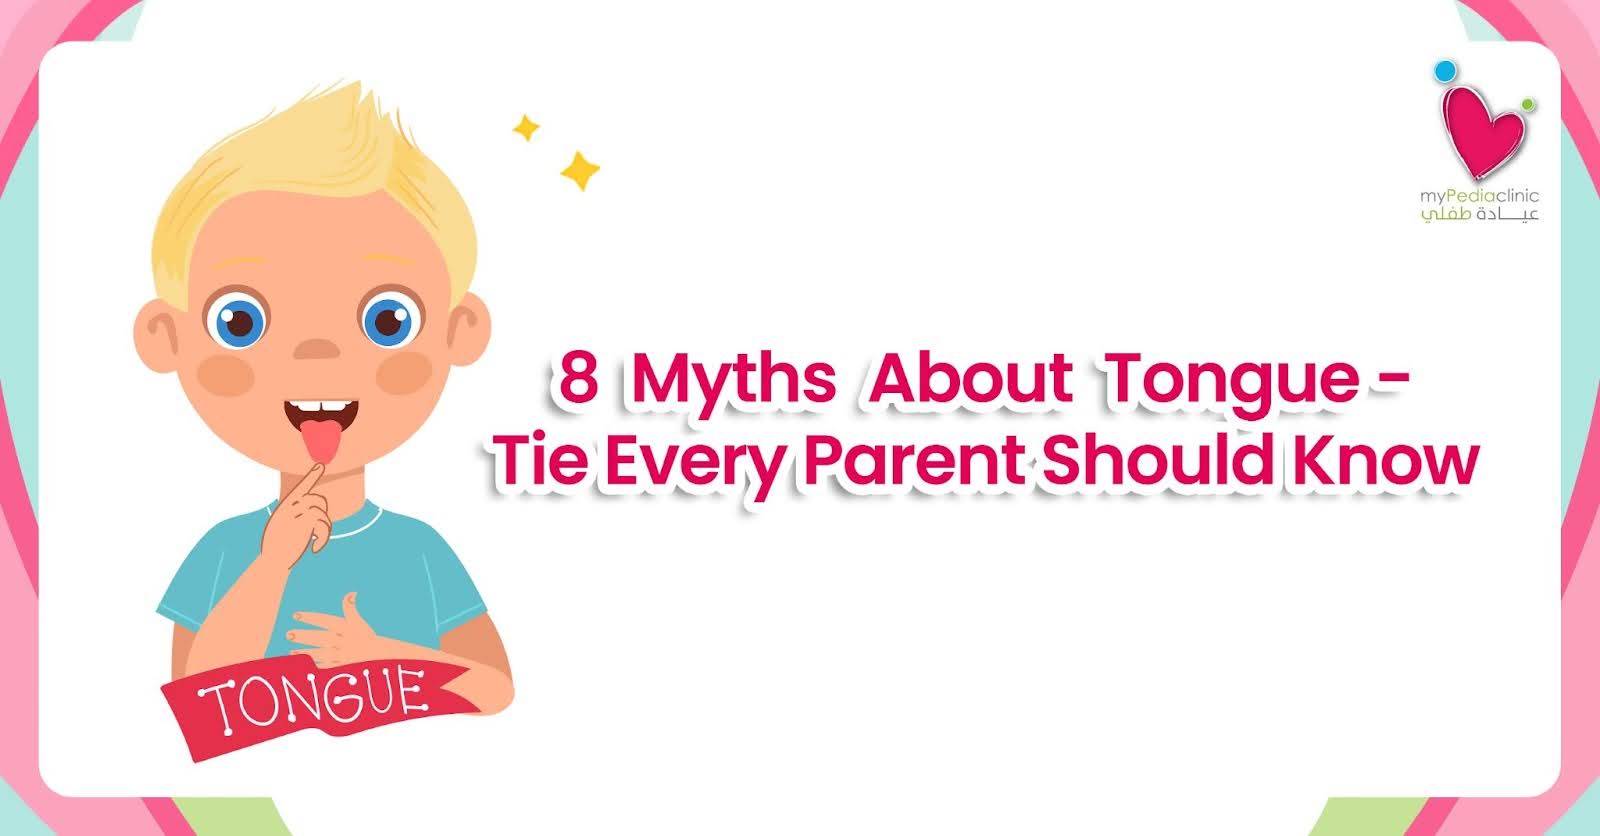 8 Myths About Tongue-Tie Every Parent Should Know